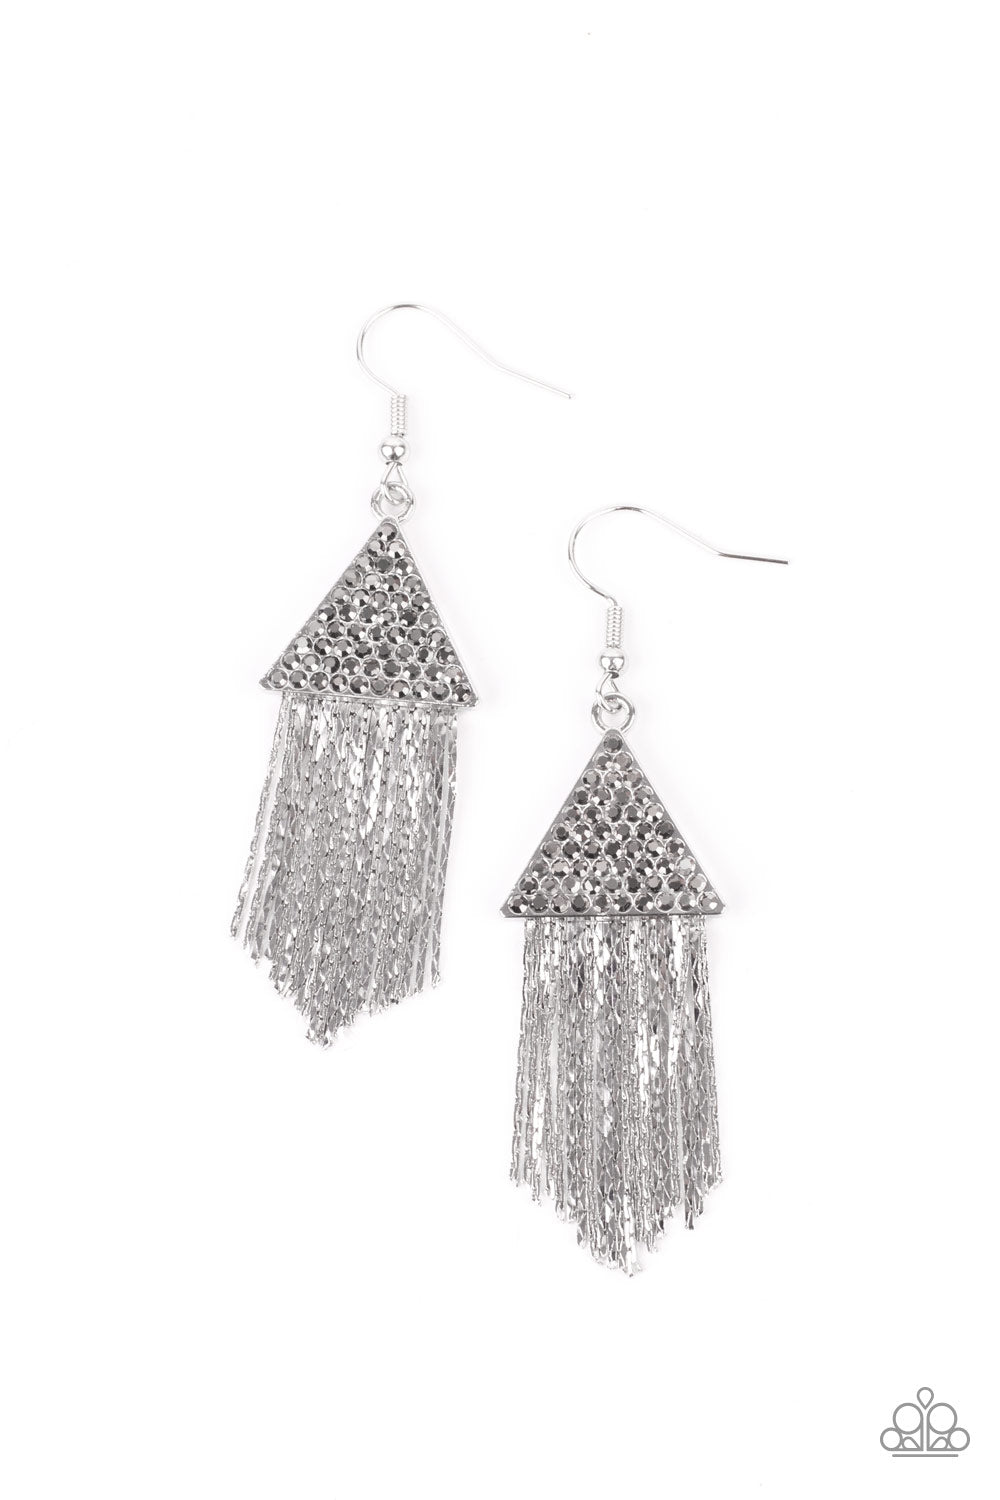 five-dollar-jewelry-pyramid-sheen-silver-earrings-paparazzi-accessories